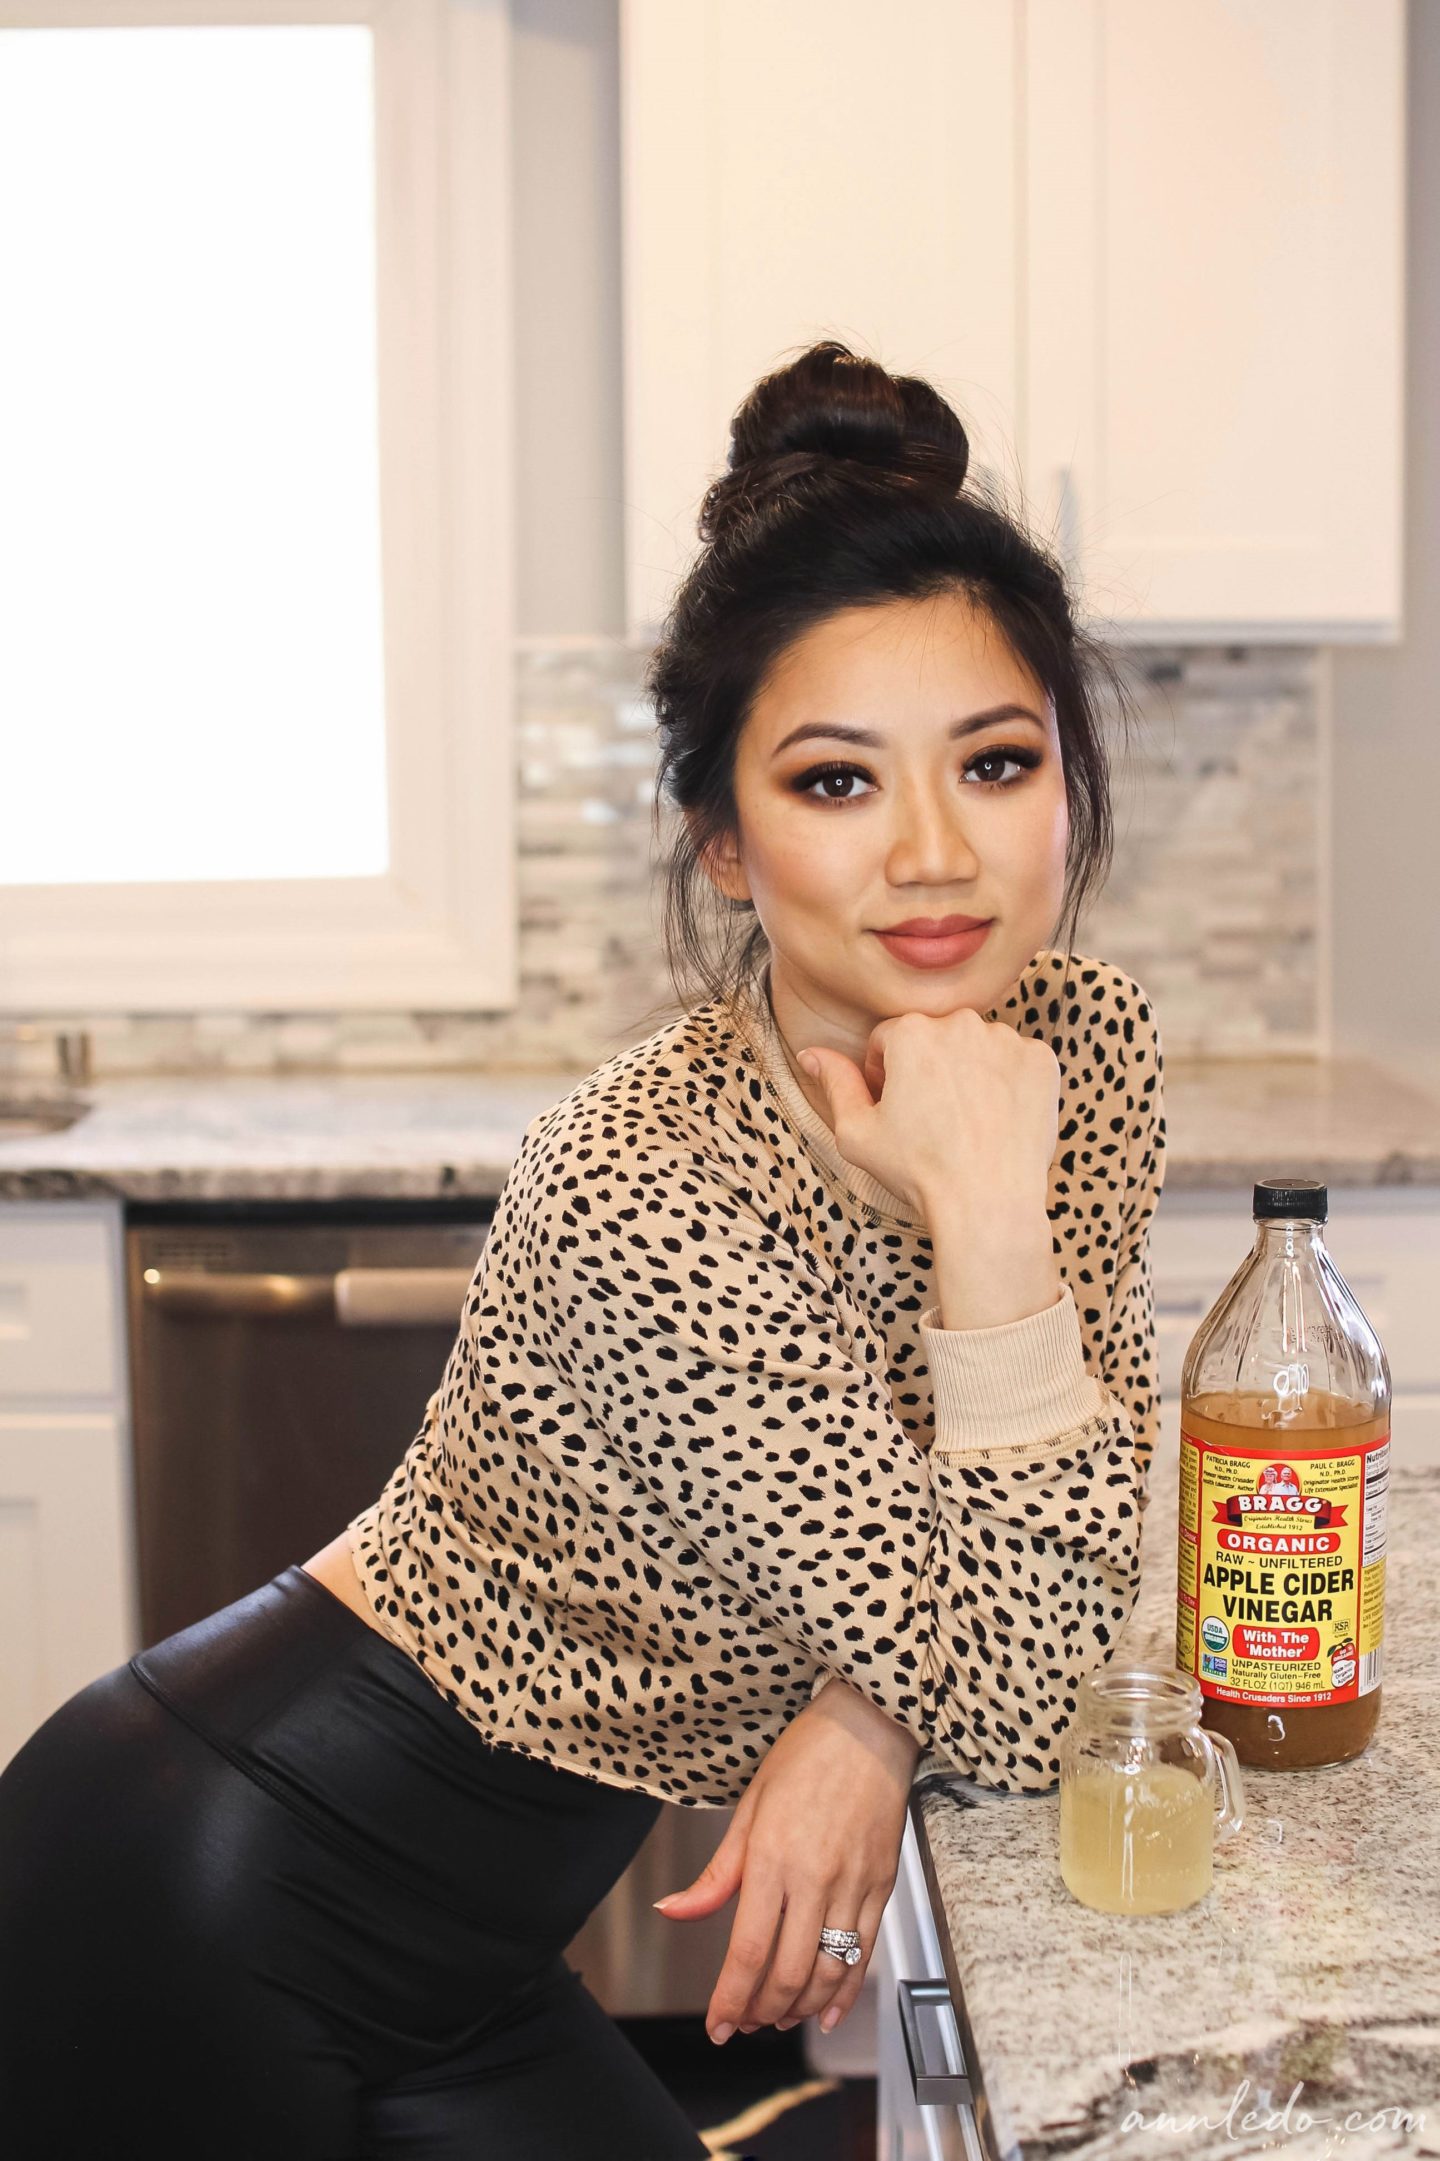 Being Fit With Apple Cider Vinegar // My Morning Routine